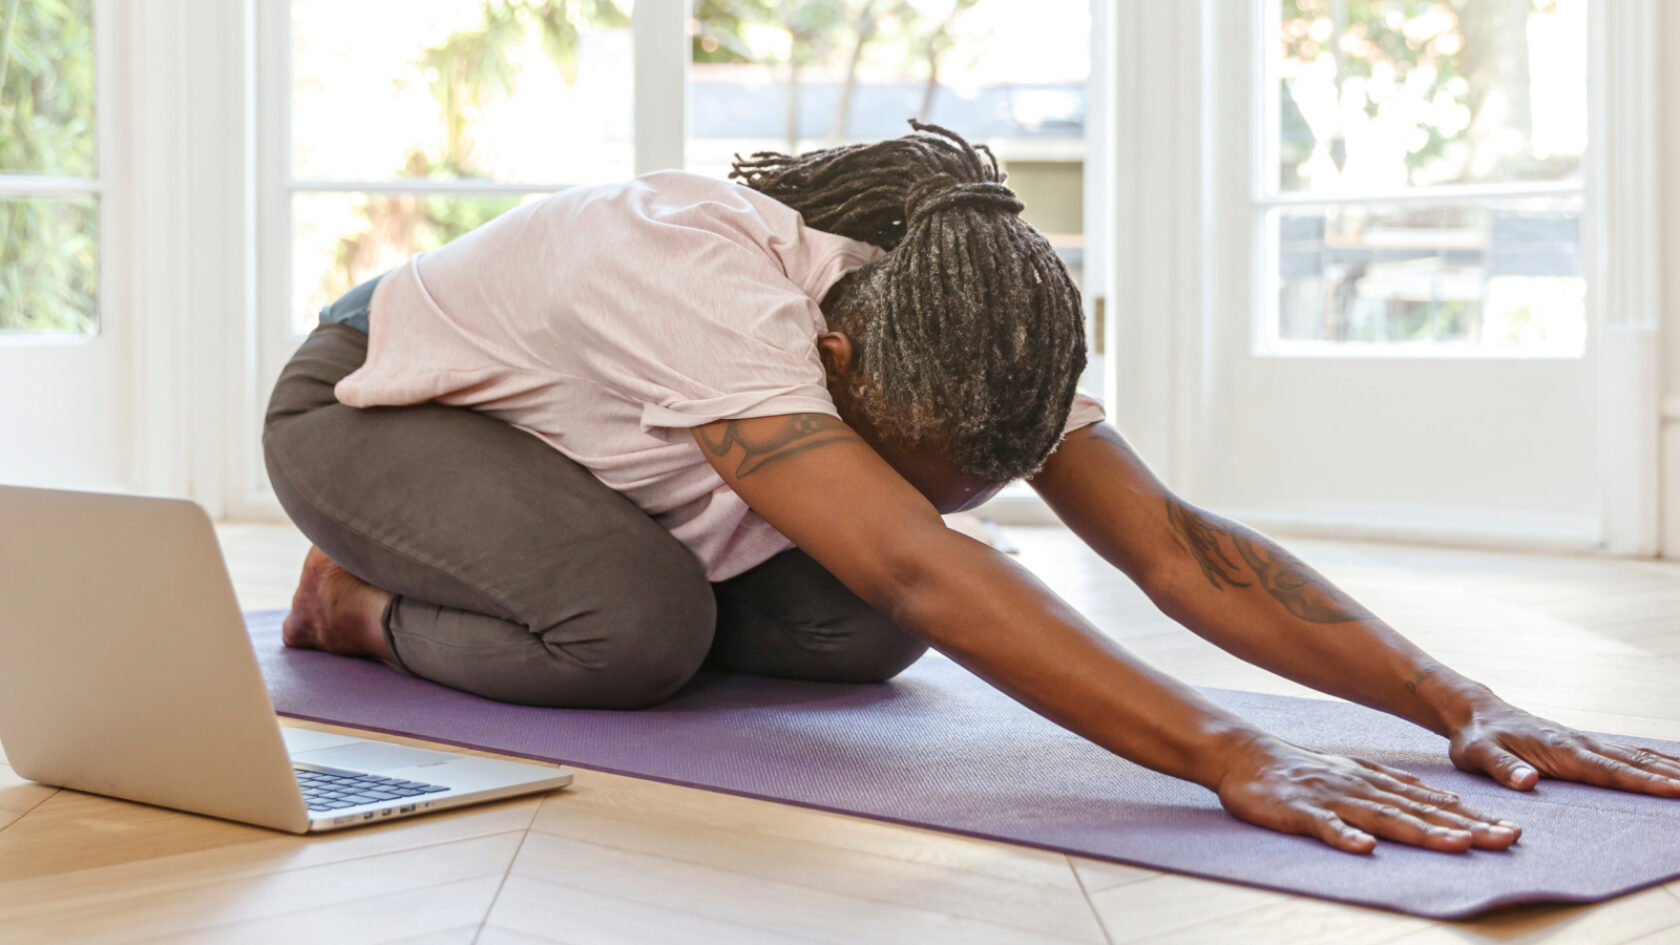 A woman stretches on a yoga mat.